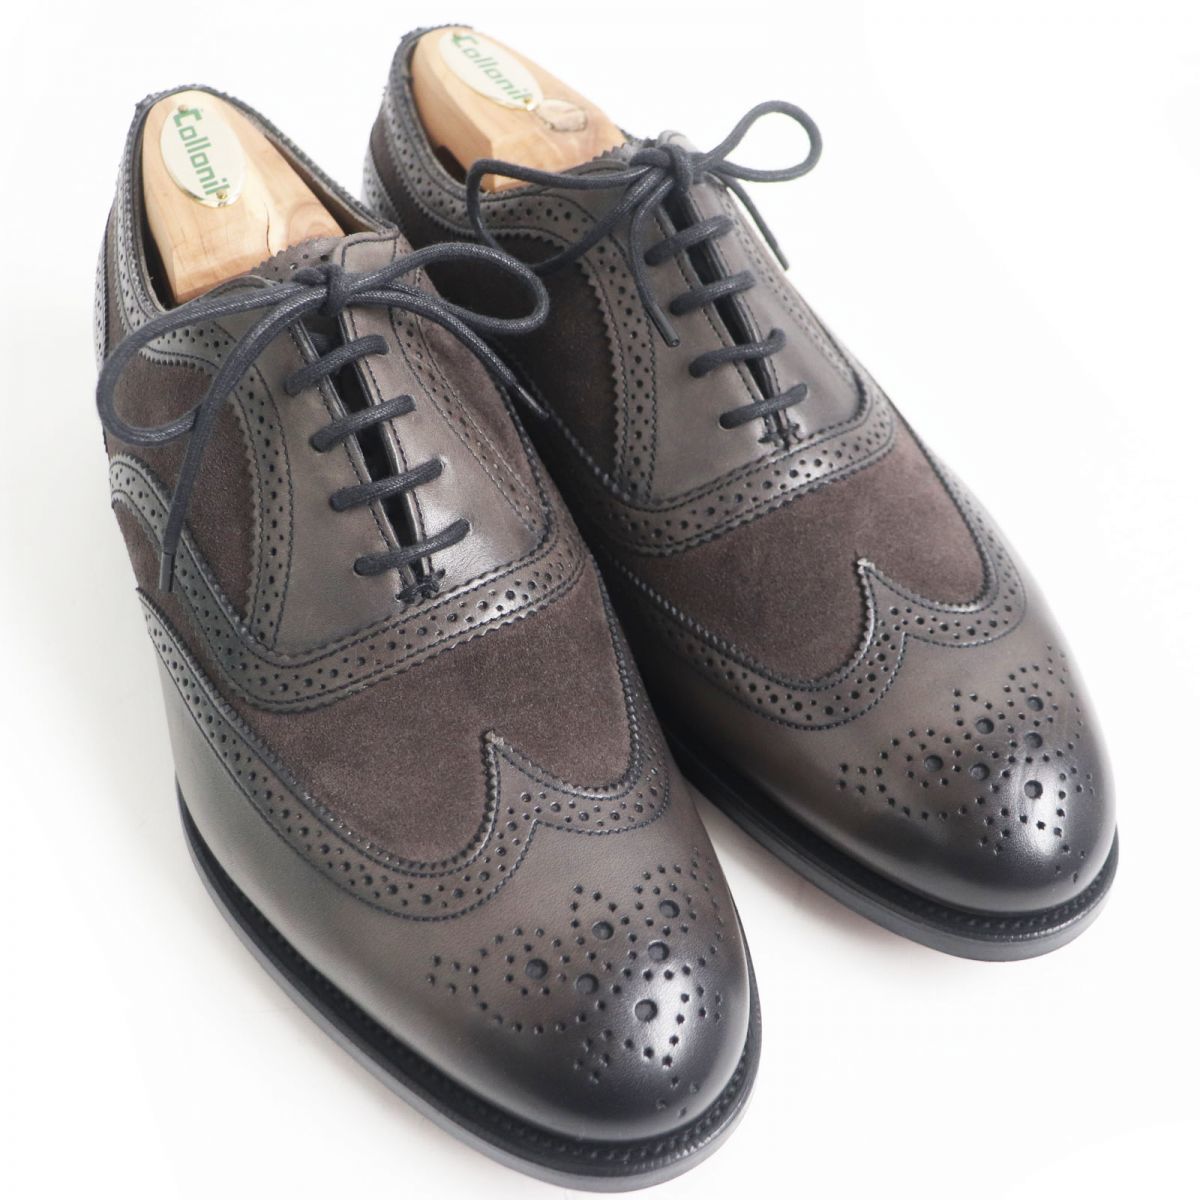  unused goods * Edward Green MALVERN III 202E full blow Grace up suede leather dress shoes dark brown 6 box attaching 